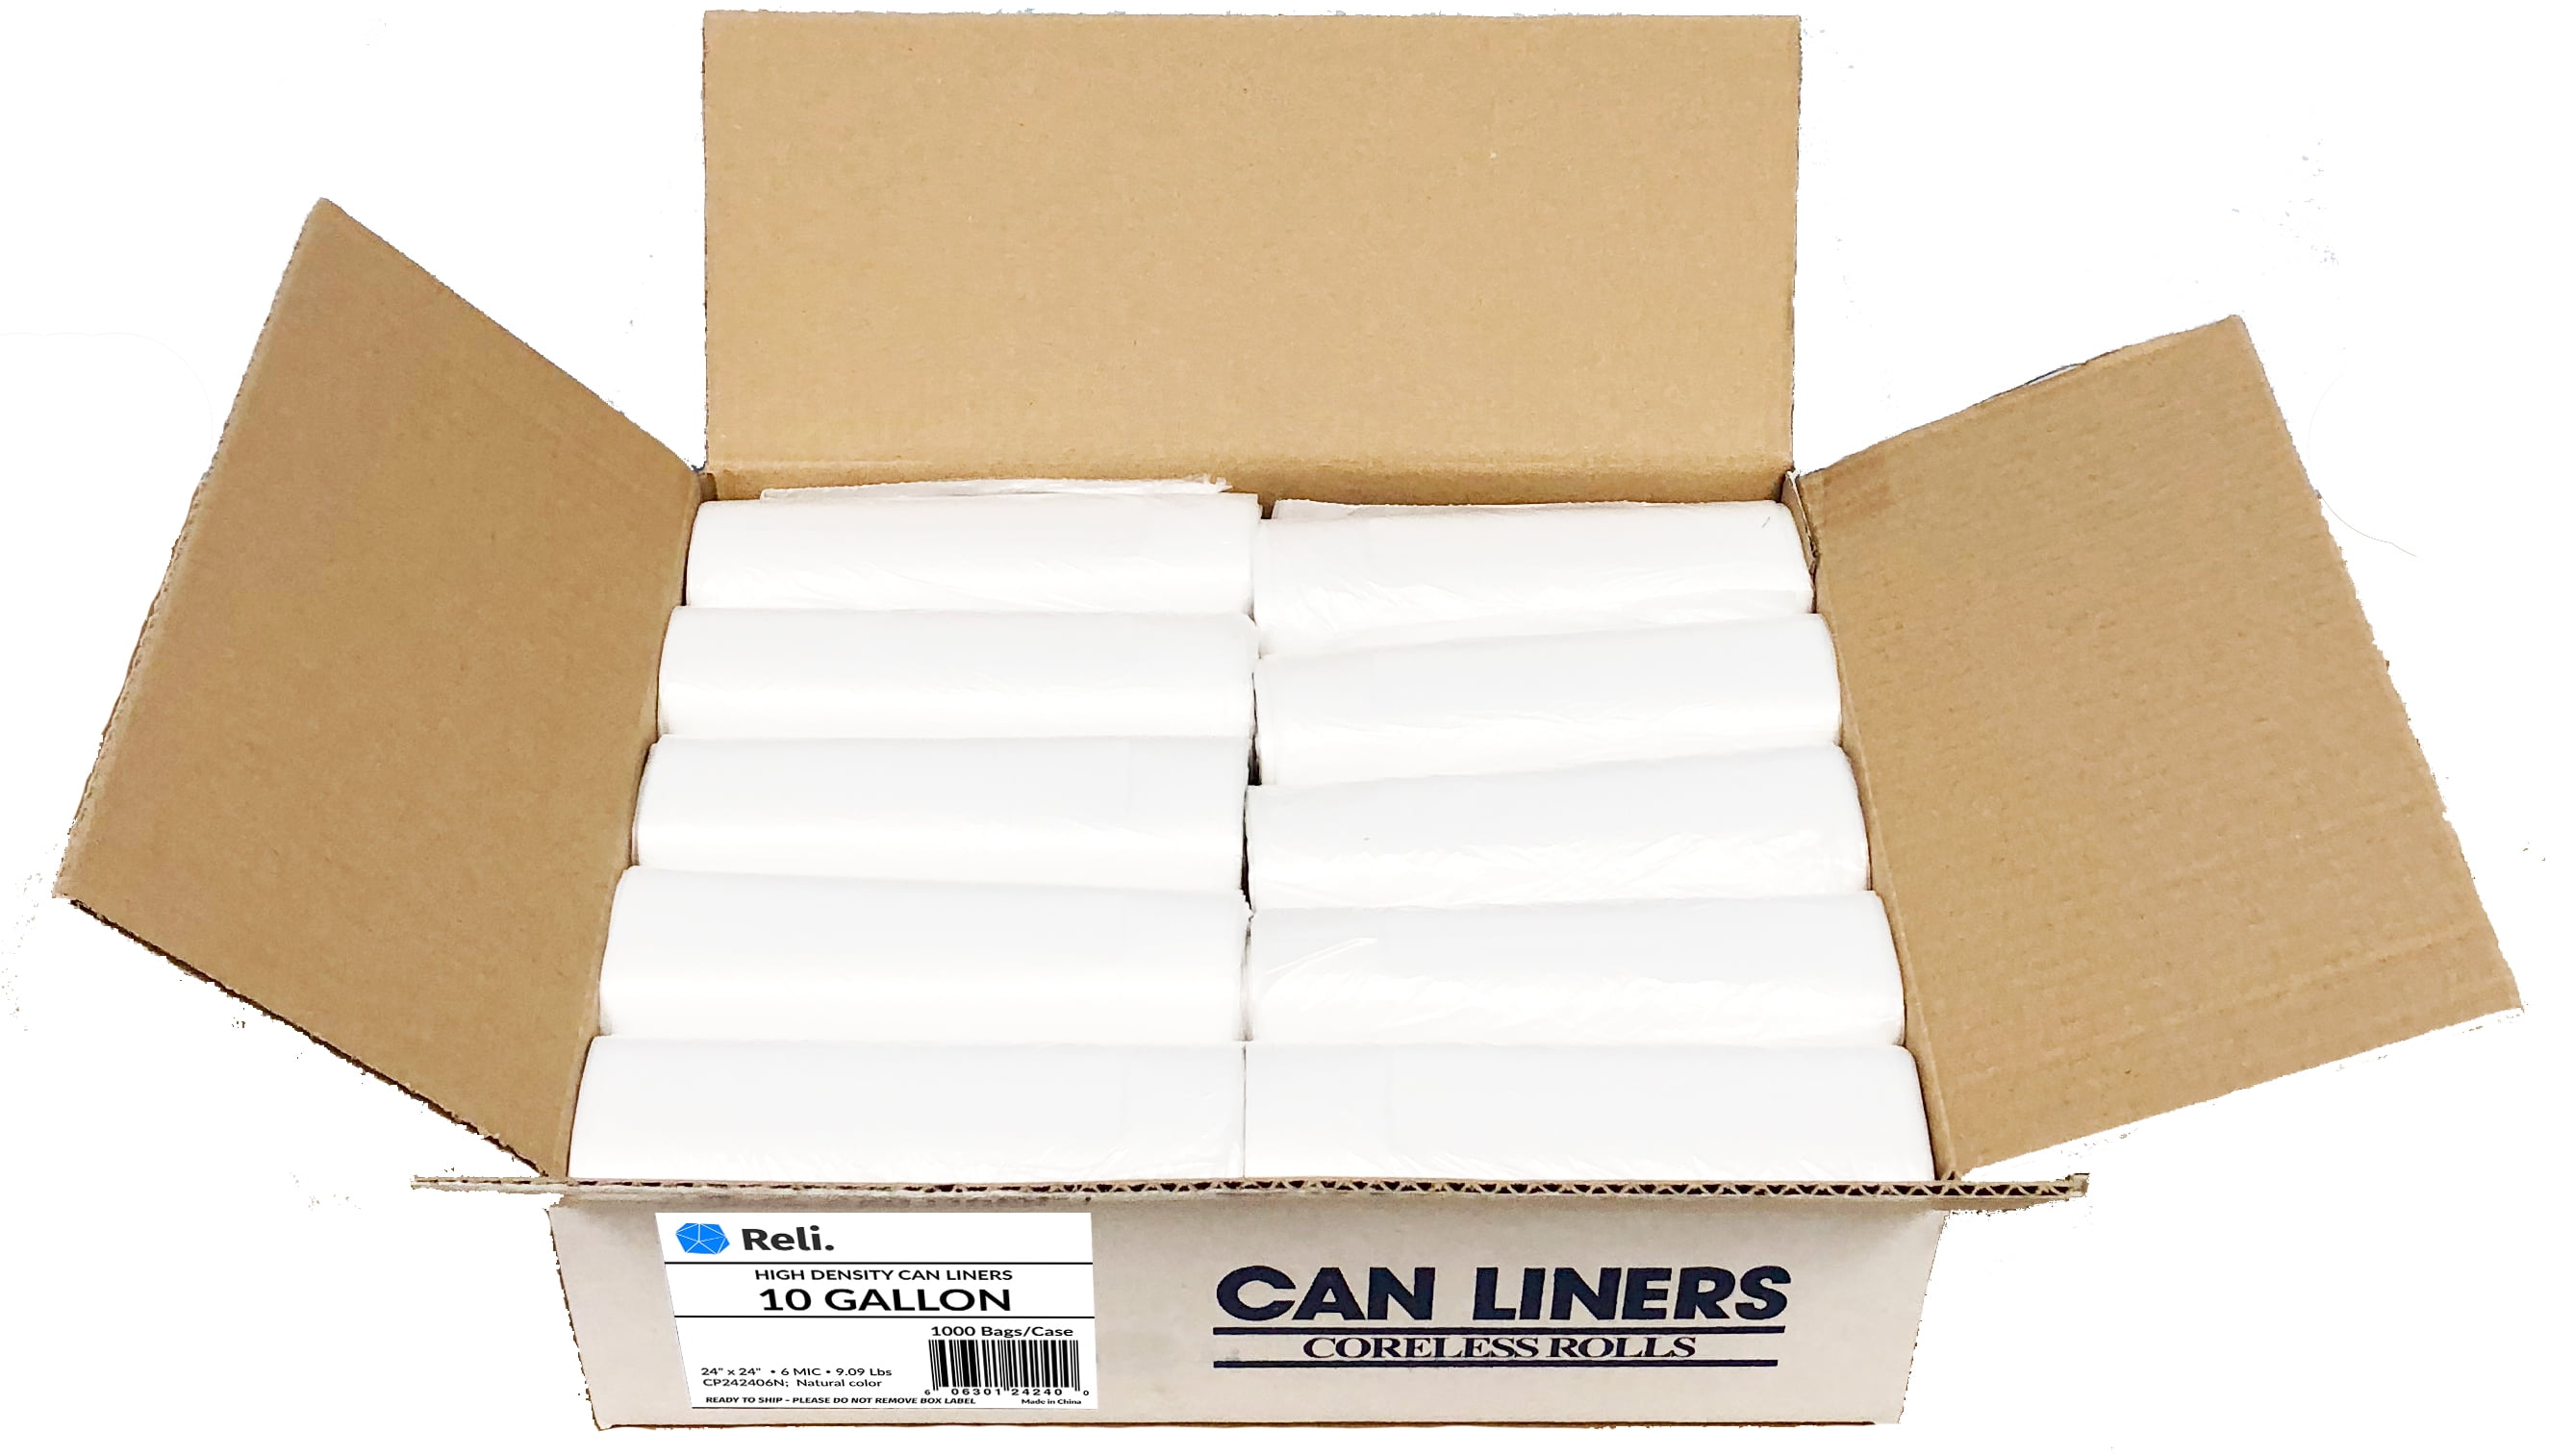 8-10 Gallon High Density Can Liners - 6 Micron - 1000/case